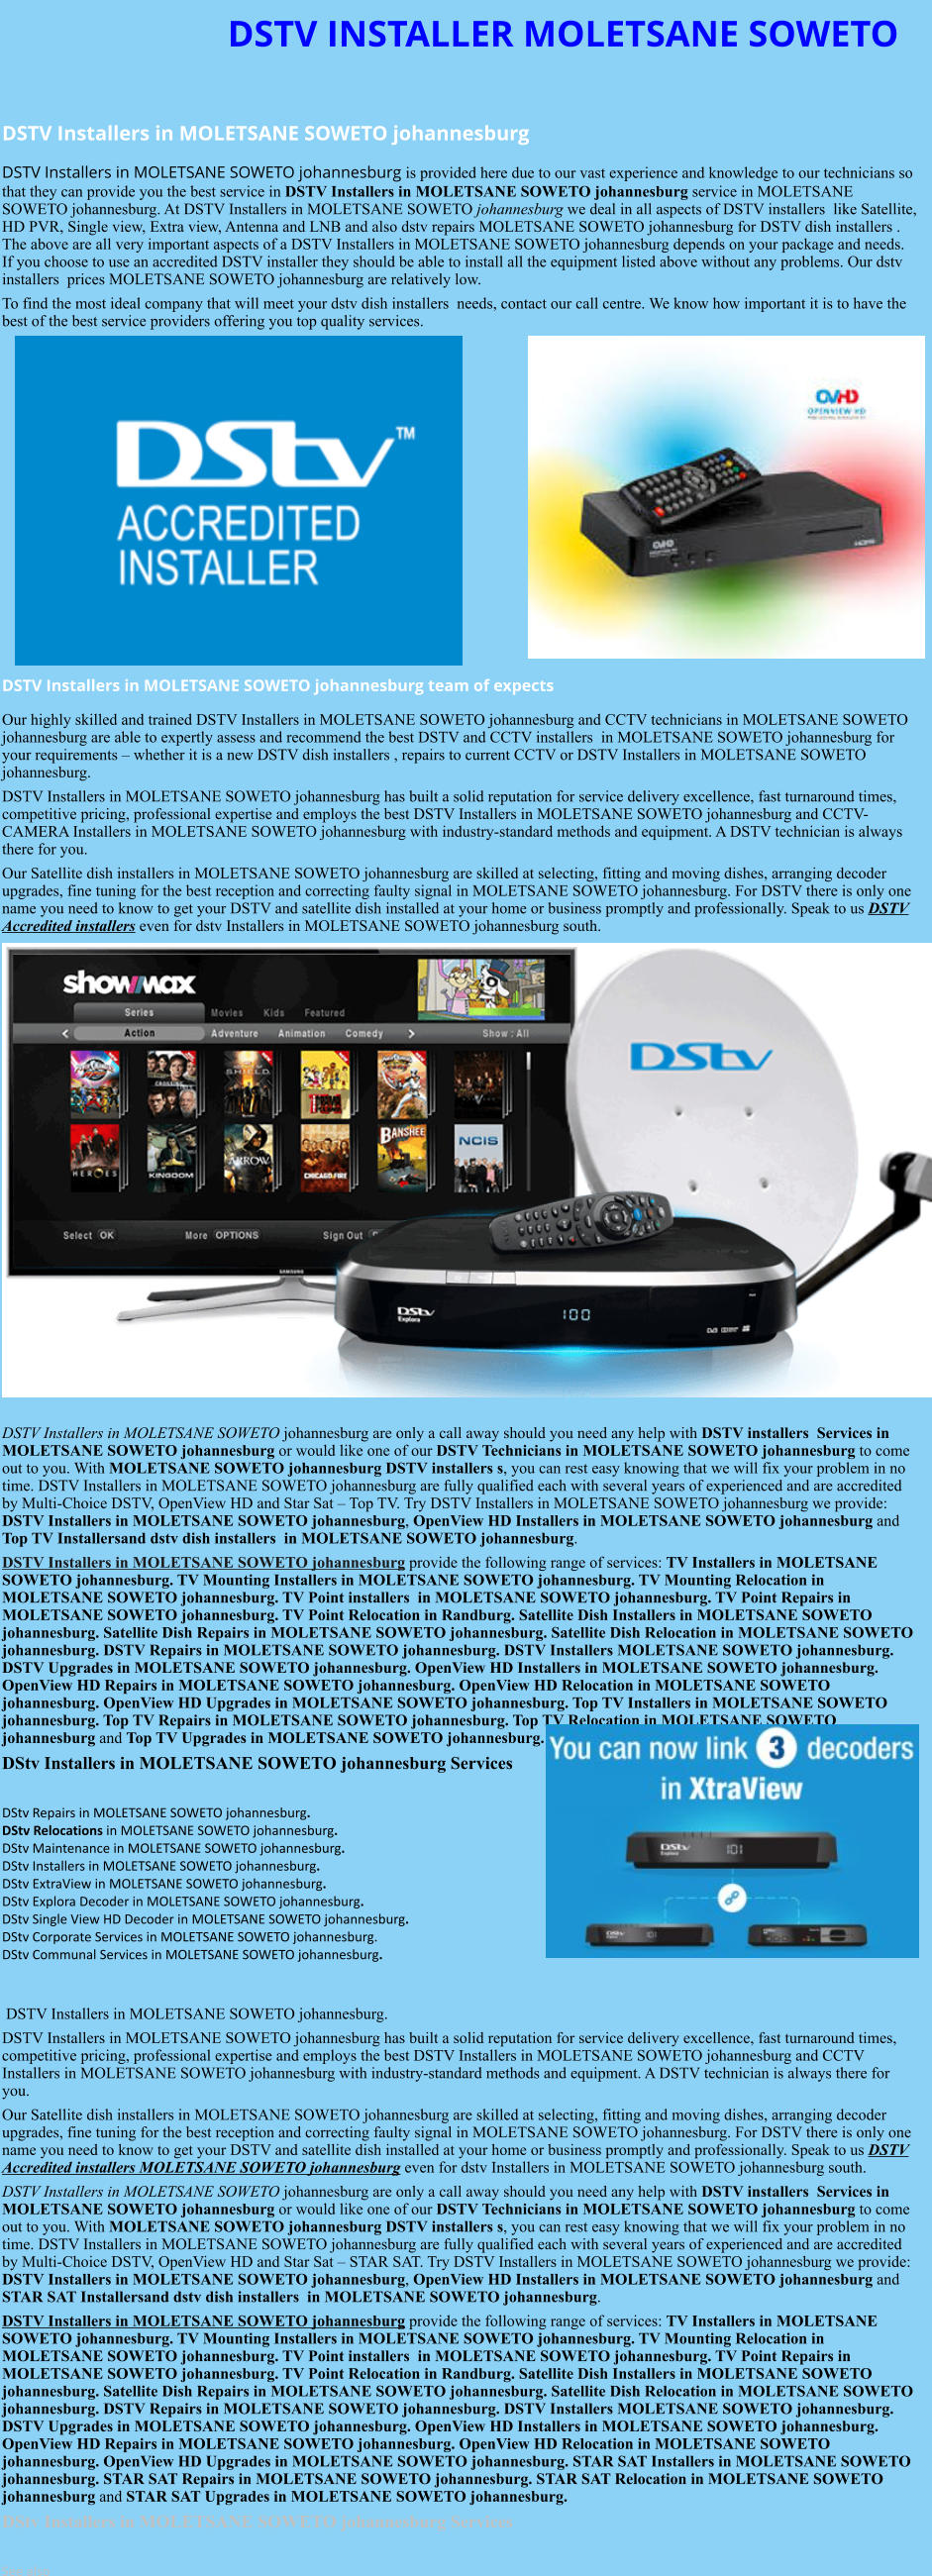 DSTV INSTALLER MOLETSANE SOWETO  DSTV Installers in MOLETSANE SOWETO johannesburg  DSTV Installers in MOLETSANE SOWETO johannesburg is provided here due to our vast experience and knowledge to our technicians so that they can provide you the best service in DSTV Installers in MOLETSANE SOWETO johannesburg service in MOLETSANE SOWETO johannesburg. At DSTV Installers in MOLETSANE SOWETO johannesburg we deal in all aspects of DSTV installers  like Satellite, HD PVR, Single view, Extra view, Antenna and LNB and also dstv repairs MOLETSANE SOWETO johannesburg for DSTV dish installers . The above are all very important aspects of a DSTV Installers in MOLETSANE SOWETO johannesburg depends on your package and needs. If you choose to use an accredited DSTV installer they should be able to install all the equipment listed above without any problems. Our dstv installers  prices MOLETSANE SOWETO johannesburg are relatively low. To find the most ideal company that will meet your dstv dish installers  needs, contact our call centre. We know how important it is to have the best of the best service providers offering you top quality services.               DSTV Installers in MOLETSANE SOWETO johannesburg team of expects Our highly skilled and trained DSTV Installers in MOLETSANE SOWETO johannesburg and CCTV technicians in MOLETSANE SOWETO johannesburg are able to expertly assess and recommend the best DSTV and CCTV installers  in MOLETSANE SOWETO johannesburg for your requirements – whether it is a new DSTV dish installers , repairs to current CCTV or DSTV Installers in MOLETSANE SOWETO johannesburg. DSTV Installers in MOLETSANE SOWETO johannesburg has built a solid reputation for service delivery excellence, fast turnaround times, competitive pricing, professional expertise and employs the best DSTV Installers in MOLETSANE SOWETO johannesburg and CCTV-CAMERA Installers in MOLETSANE SOWETO johannesburg with industry-standard methods and equipment. A DSTV technician is always there for you. Our Satellite dish installers in MOLETSANE SOWETO johannesburg are skilled at selecting, fitting and moving dishes, arranging decoder upgrades, fine tuning for the best reception and correcting faulty signal in MOLETSANE SOWETO johannesburg. For DSTV there is only one name you need to know to get your DSTV and satellite dish installed at your home or business promptly and professionally. Speak to us DSTV Accredited installers even for dstv Installers in MOLETSANE SOWETO johannesburg south.                     DSTV Installers in MOLETSANE SOWETO johannesburg are only a call away should you need any help with DSTV installers  Services in MOLETSANE SOWETO johannesburg or would like one of our DSTV Technicians in MOLETSANE SOWETO johannesburg to come out to you. With MOLETSANE SOWETO johannesburg DSTV installers s, you can rest easy knowing that we will fix your problem in no time. DSTV Installers in MOLETSANE SOWETO johannesburg are fully qualified each with several years of experienced and are accredited by Multi-Choice DSTV, OpenView HD and Star Sat – Top TV. Try DSTV Installers in MOLETSANE SOWETO johannesburg we provide: DSTV Installers in MOLETSANE SOWETO johannesburg, OpenView HD Installers in MOLETSANE SOWETO johannesburg and Top TV Installersand dstv dish installers  in MOLETSANE SOWETO johannesburg. DSTV Installers in MOLETSANE SOWETO johannesburg provide the following range of services: TV Installers in MOLETSANE SOWETO johannesburg. TV Mounting Installers in MOLETSANE SOWETO johannesburg. TV Mounting Relocation in MOLETSANE SOWETO johannesburg. TV Point installers  in MOLETSANE SOWETO johannesburg. TV Point Repairs in MOLETSANE SOWETO johannesburg. TV Point Relocation in Randburg. Satellite Dish Installers in MOLETSANE SOWETO johannesburg. Satellite Dish Repairs in MOLETSANE SOWETO johannesburg. Satellite Dish Relocation in MOLETSANE SOWETO johannesburg. DSTV Repairs in MOLETSANE SOWETO johannesburg. DSTV Installers MOLETSANE SOWETO johannesburg. DSTV Upgrades in MOLETSANE SOWETO johannesburg. OpenView HD Installers in MOLETSANE SOWETO johannesburg. OpenView HD Repairs in MOLETSANE SOWETO johannesburg. OpenView HD Relocation in MOLETSANE SOWETO johannesburg. OpenView HD Upgrades in MOLETSANE SOWETO johannesburg. Top TV Installers in MOLETSANE SOWETO johannesburg. Top TV Repairs in MOLETSANE SOWETO johannesburg. Top TV Relocation in MOLETSANE SOWETO johannesburg and Top TV Upgrades in MOLETSANE SOWETO johannesburg. DStv Installers in MOLETSANE SOWETO johannesburg Services  DStv Repairs in MOLETSANE SOWETO johannesburg.  DStv Relocations in MOLETSANE SOWETO johannesburg.  DStv Maintenance in MOLETSANE SOWETO johannesburg. DStv Installers in MOLETSANE SOWETO johannesburg. DStv ExtraView in MOLETSANE SOWETO johannesburg. DStv Explora Decoder in MOLETSANE SOWETO johannesburg. DStv Single View HD Decoder in MOLETSANE SOWETO johannesburg. DStv Corporate Services in MOLETSANE SOWETO johannesburg. DStv Communal Services in MOLETSANE SOWETO johannesburg.    DSTV Installers in MOLETSANE SOWETO johannesburg. DSTV Installers in MOLETSANE SOWETO johannesburg has built a solid reputation for service delivery excellence, fast turnaround times, competitive pricing, professional expertise and employs the best DSTV Installers in MOLETSANE SOWETO johannesburg and CCTV Installers in MOLETSANE SOWETO johannesburg with industry-standard methods and equipment. A DSTV technician is always there for you. Our Satellite dish installers in MOLETSANE SOWETO johannesburg are skilled at selecting, fitting and moving dishes, arranging decoder upgrades, fine tuning for the best reception and correcting faulty signal in MOLETSANE SOWETO johannesburg. For DSTV there is only one name you need to know to get your DSTV and satellite dish installed at your home or business promptly and professionally. Speak to us DSTV Accredited installers MOLETSANE SOWETO johannesburg even for dstv Installers in MOLETSANE SOWETO johannesburg south. DSTV Installers in MOLETSANE SOWETO johannesburg are only a call away should you need any help with DSTV installers  Services in MOLETSANE SOWETO johannesburg or would like one of our DSTV Technicians in MOLETSANE SOWETO johannesburg to come out to you. With MOLETSANE SOWETO johannesburg DSTV installers s, you can rest easy knowing that we will fix your problem in no time. DSTV Installers in MOLETSANE SOWETO johannesburg are fully qualified each with several years of experienced and are accredited by Multi-Choice DSTV, OpenView HD and Star Sat – STAR SAT. Try DSTV Installers in MOLETSANE SOWETO johannesburg we provide: DSTV Installers in MOLETSANE SOWETO johannesburg, OpenView HD Installers in MOLETSANE SOWETO johannesburg and STAR SAT Installersand dstv dish installers  in MOLETSANE SOWETO johannesburg. DSTV Installers in MOLETSANE SOWETO johannesburg provide the following range of services: TV Installers in MOLETSANE SOWETO johannesburg. TV Mounting Installers in MOLETSANE SOWETO johannesburg. TV Mounting Relocation in MOLETSANE SOWETO johannesburg. TV Point installers  in MOLETSANE SOWETO johannesburg. TV Point Repairs in MOLETSANE SOWETO johannesburg. TV Point Relocation in Randburg. Satellite Dish Installers in MOLETSANE SOWETO johannesburg. Satellite Dish Repairs in MOLETSANE SOWETO johannesburg. Satellite Dish Relocation in MOLETSANE SOWETO johannesburg. DSTV Repairs in MOLETSANE SOWETO johannesburg. DSTV Installers MOLETSANE SOWETO johannesburg. DSTV Upgrades in MOLETSANE SOWETO johannesburg. OpenView HD Installers in MOLETSANE SOWETO johannesburg. OpenView HD Repairs in MOLETSANE SOWETO johannesburg. OpenView HD Relocation in MOLETSANE SOWETO johannesburg. OpenView HD Upgrades in MOLETSANE SOWETO johannesburg. STAR SAT Installers in MOLETSANE SOWETO johannesburg. STAR SAT Repairs in MOLETSANE SOWETO johannesburg. STAR SAT Relocation in MOLETSANE SOWETO johannesburg and STAR SAT Upgrades in MOLETSANE SOWETO johannesburg. DStv Installers in MOLETSANE SOWETO johannesburg Services  See also